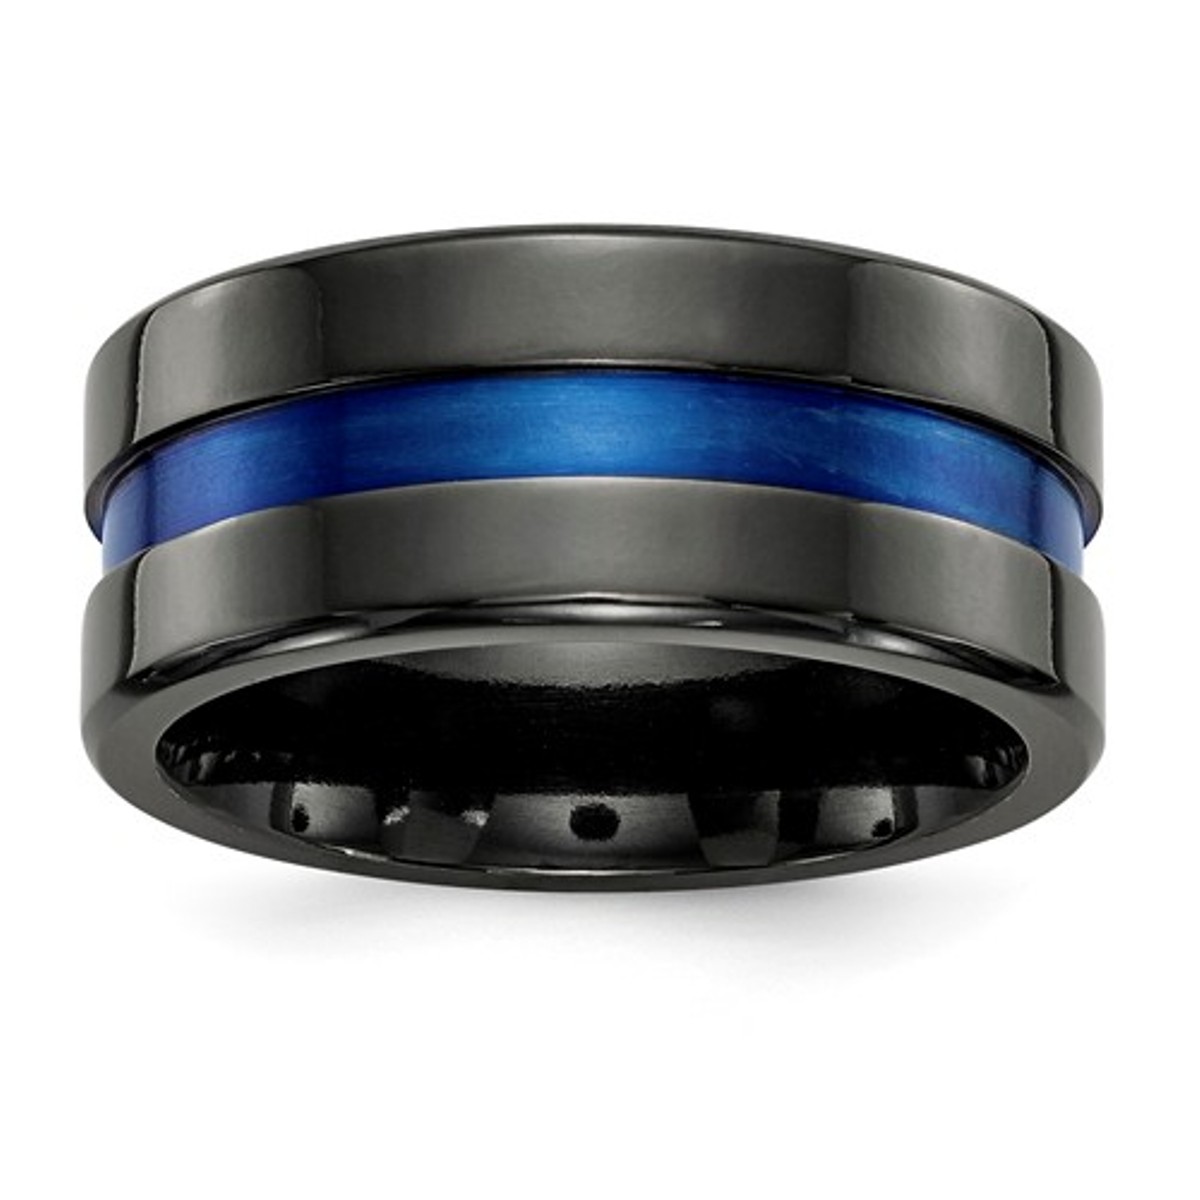  Black Ti Blue Anodized Wide Center 10mm Band